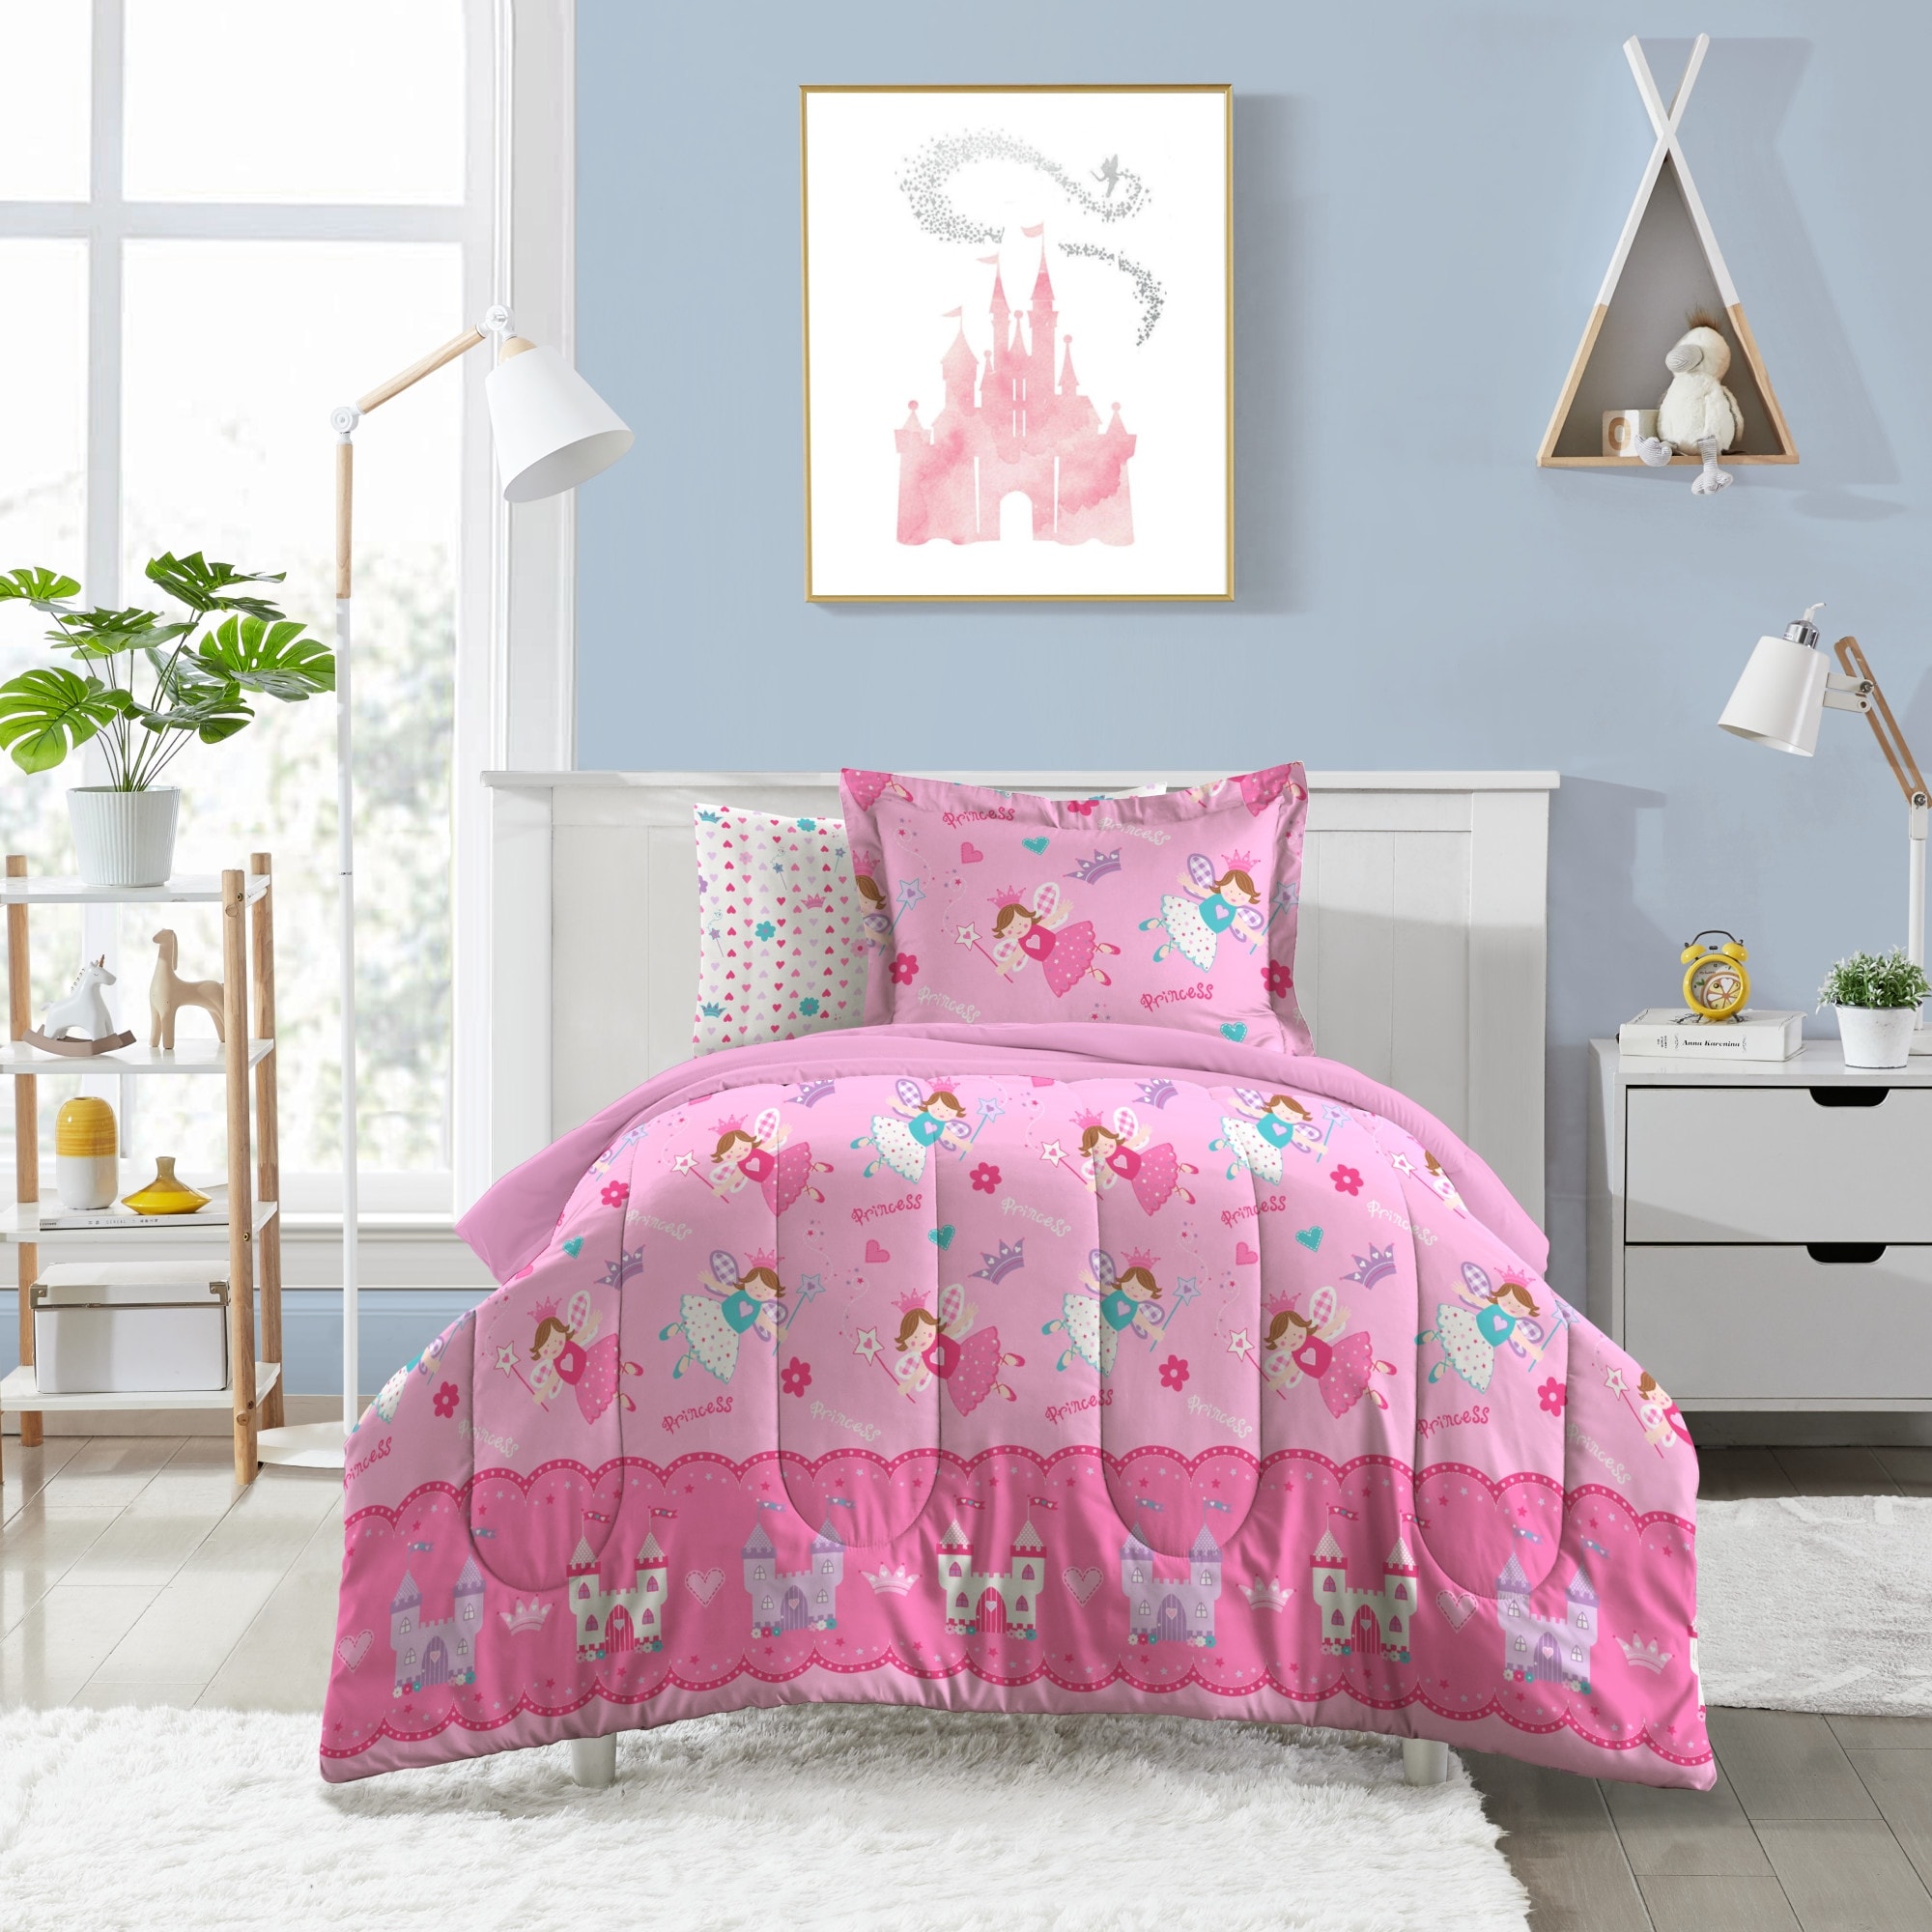 https://ak1.ostkcdn.com/images/products/is/images/direct/0f431b9b1ff4ef3785d27bdc2b9bc2b4b72c7b37/Dream-Factory-Magical-Princess-4-piece-Toddler-Comforter-Set.jpg